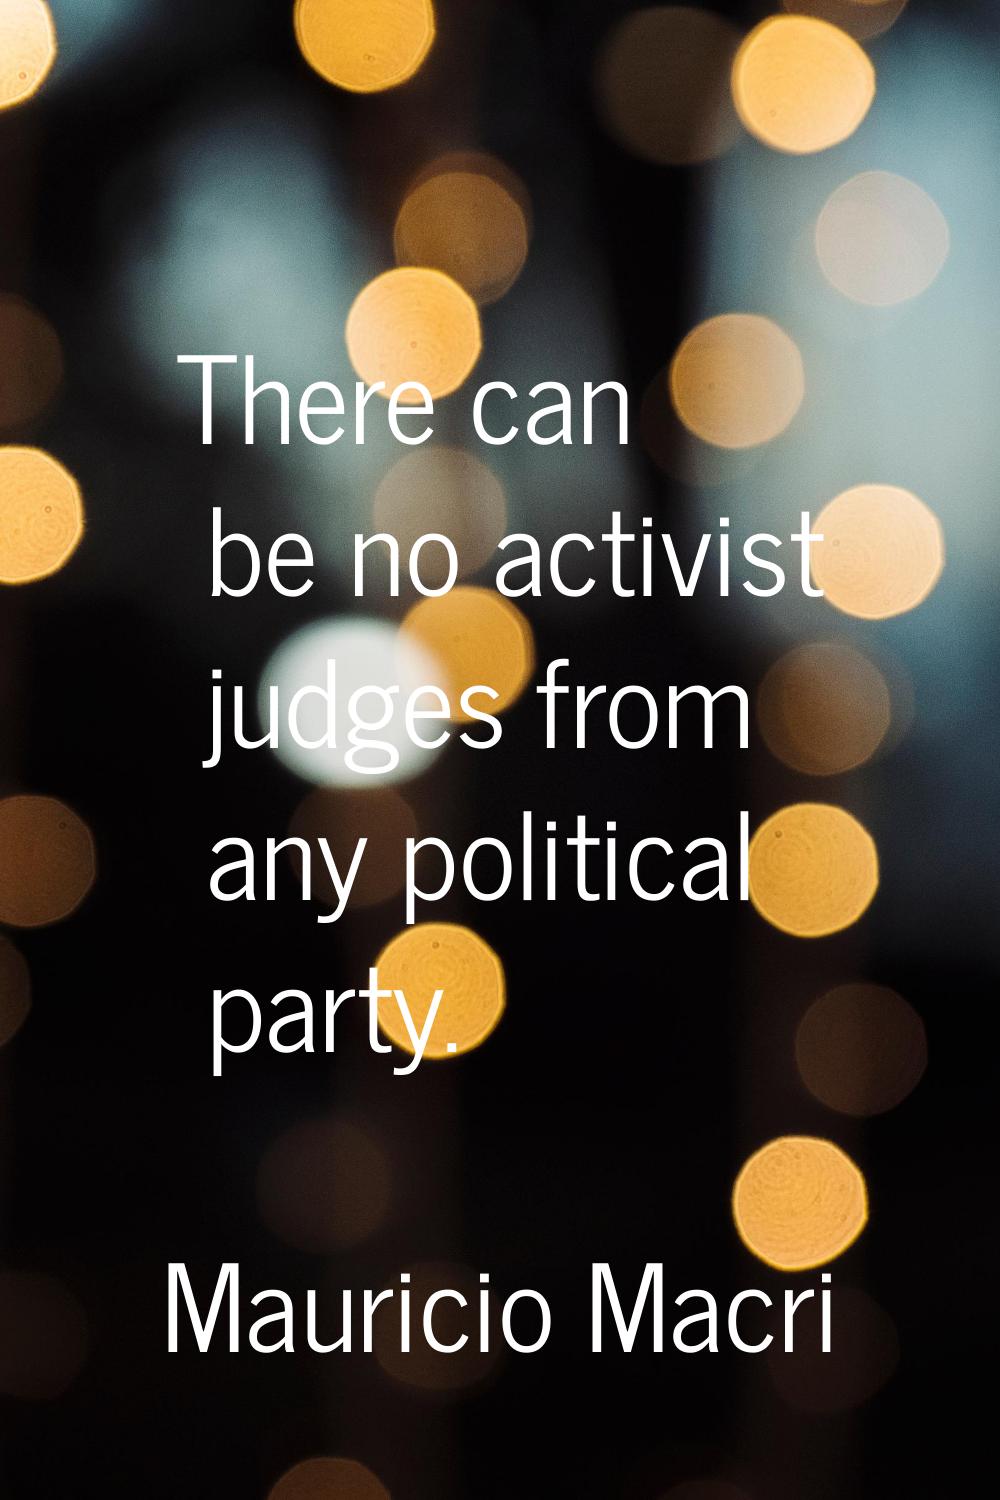 There can be no activist judges from any political party.